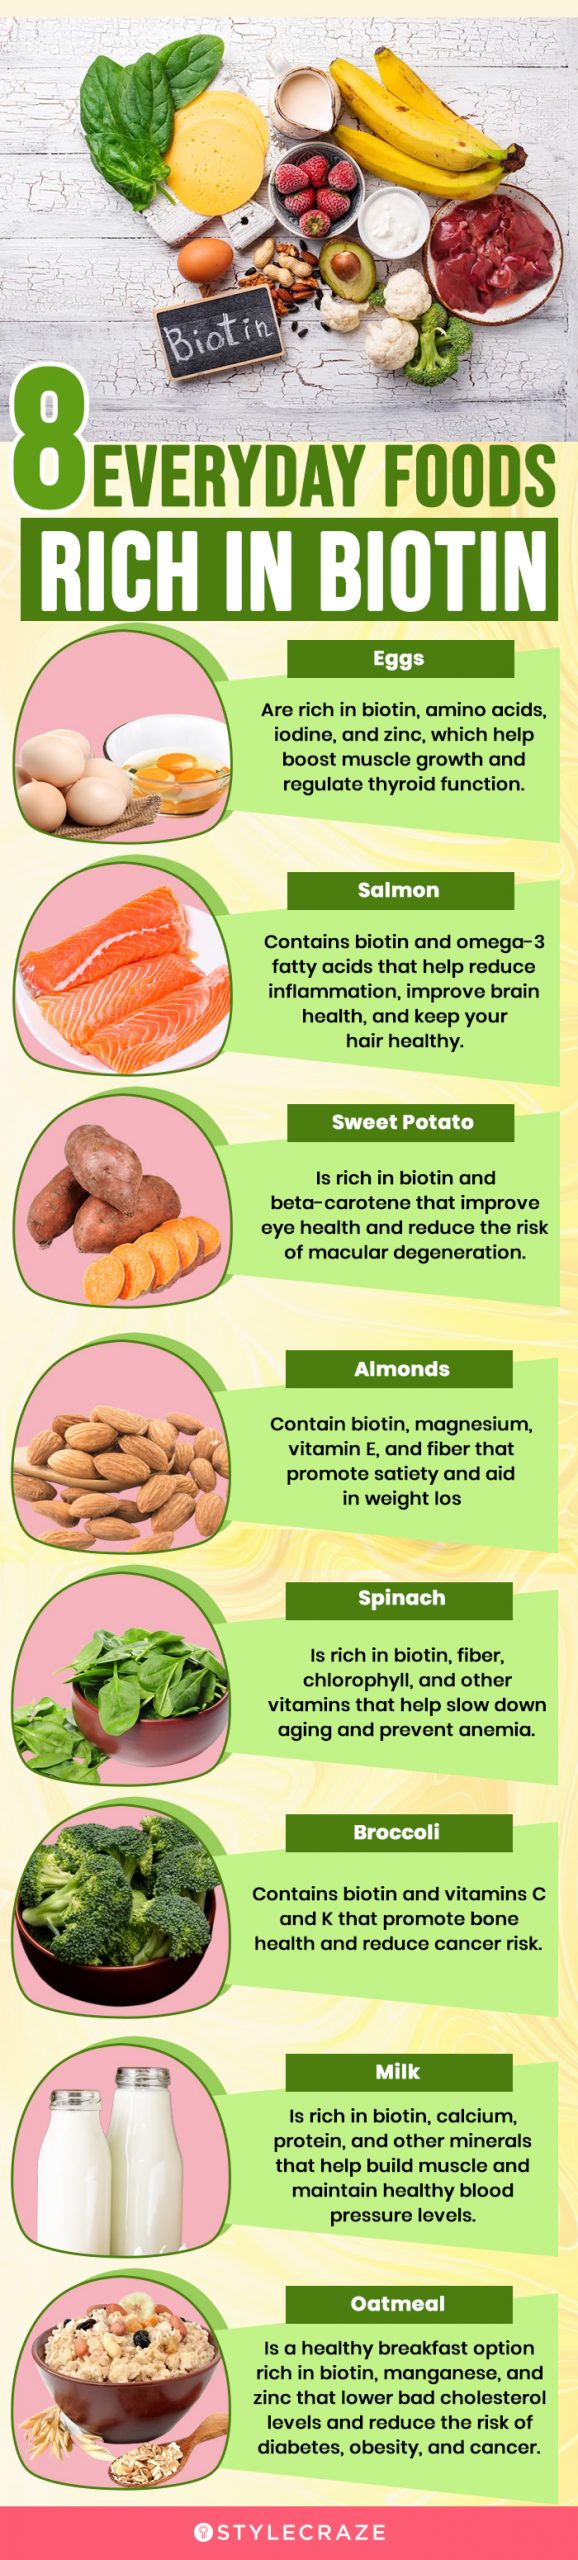 8 biotin rich foods to eat (infographic)